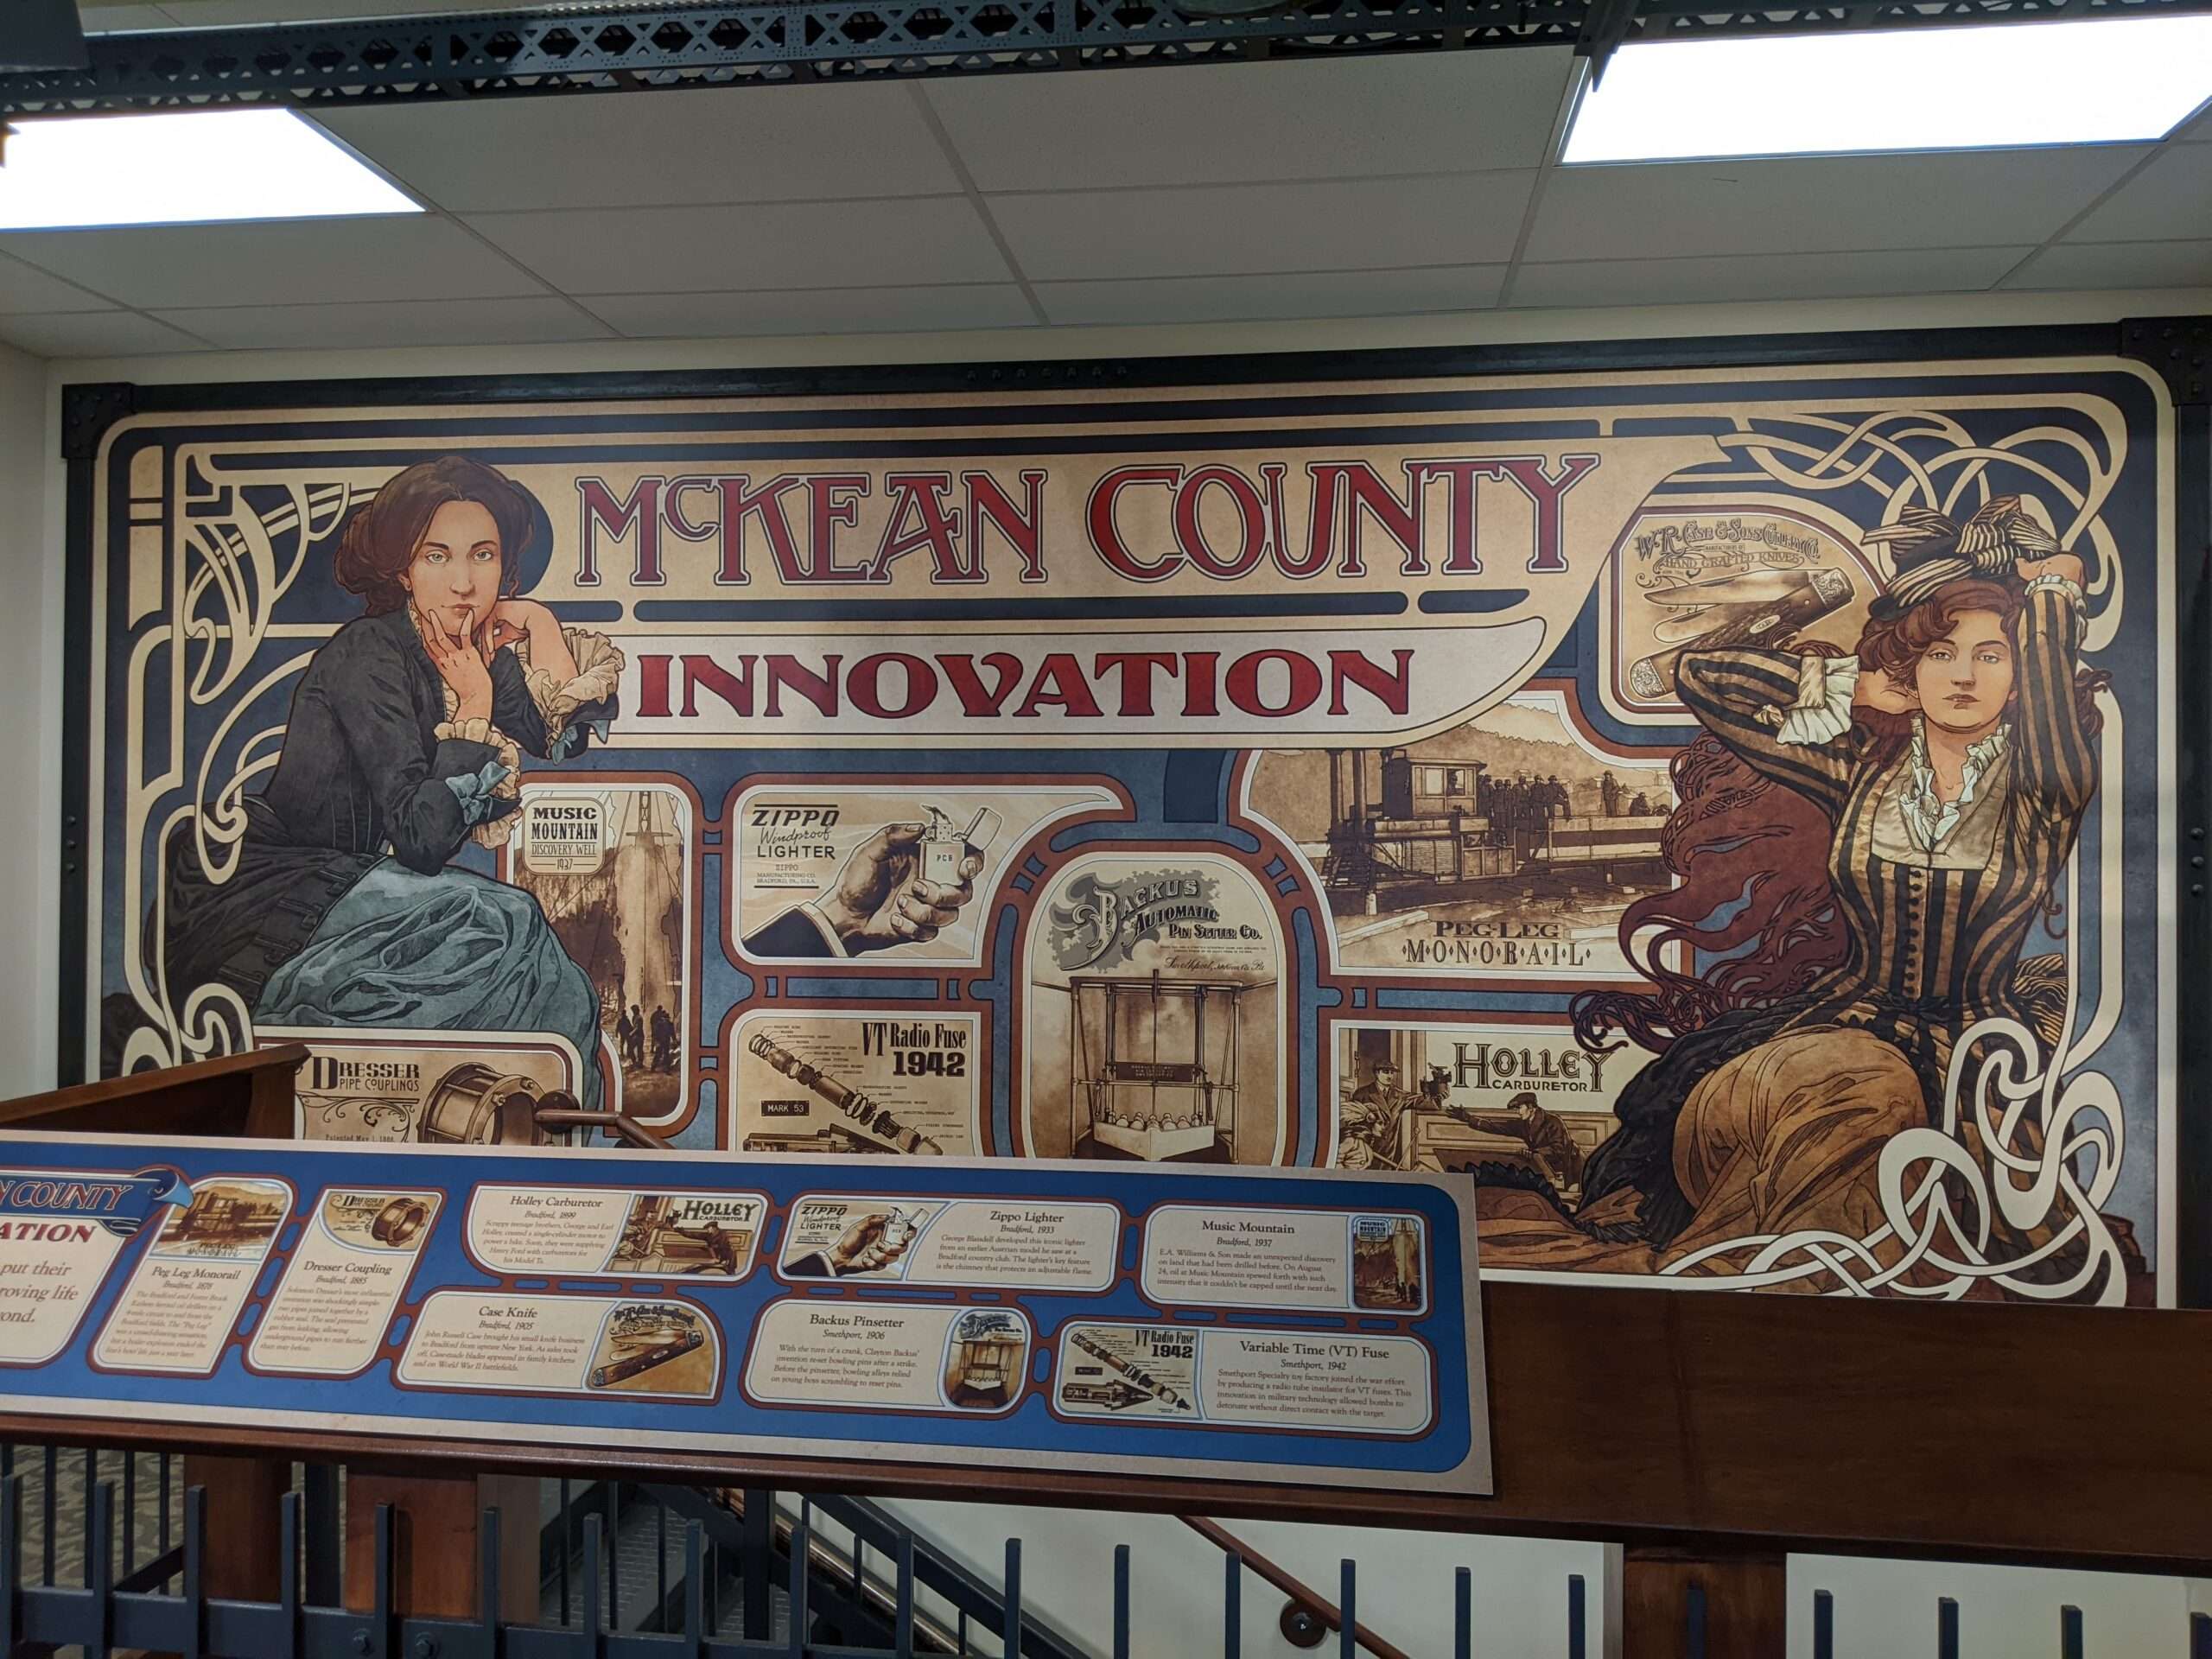 Museum display of innovation in McKean County